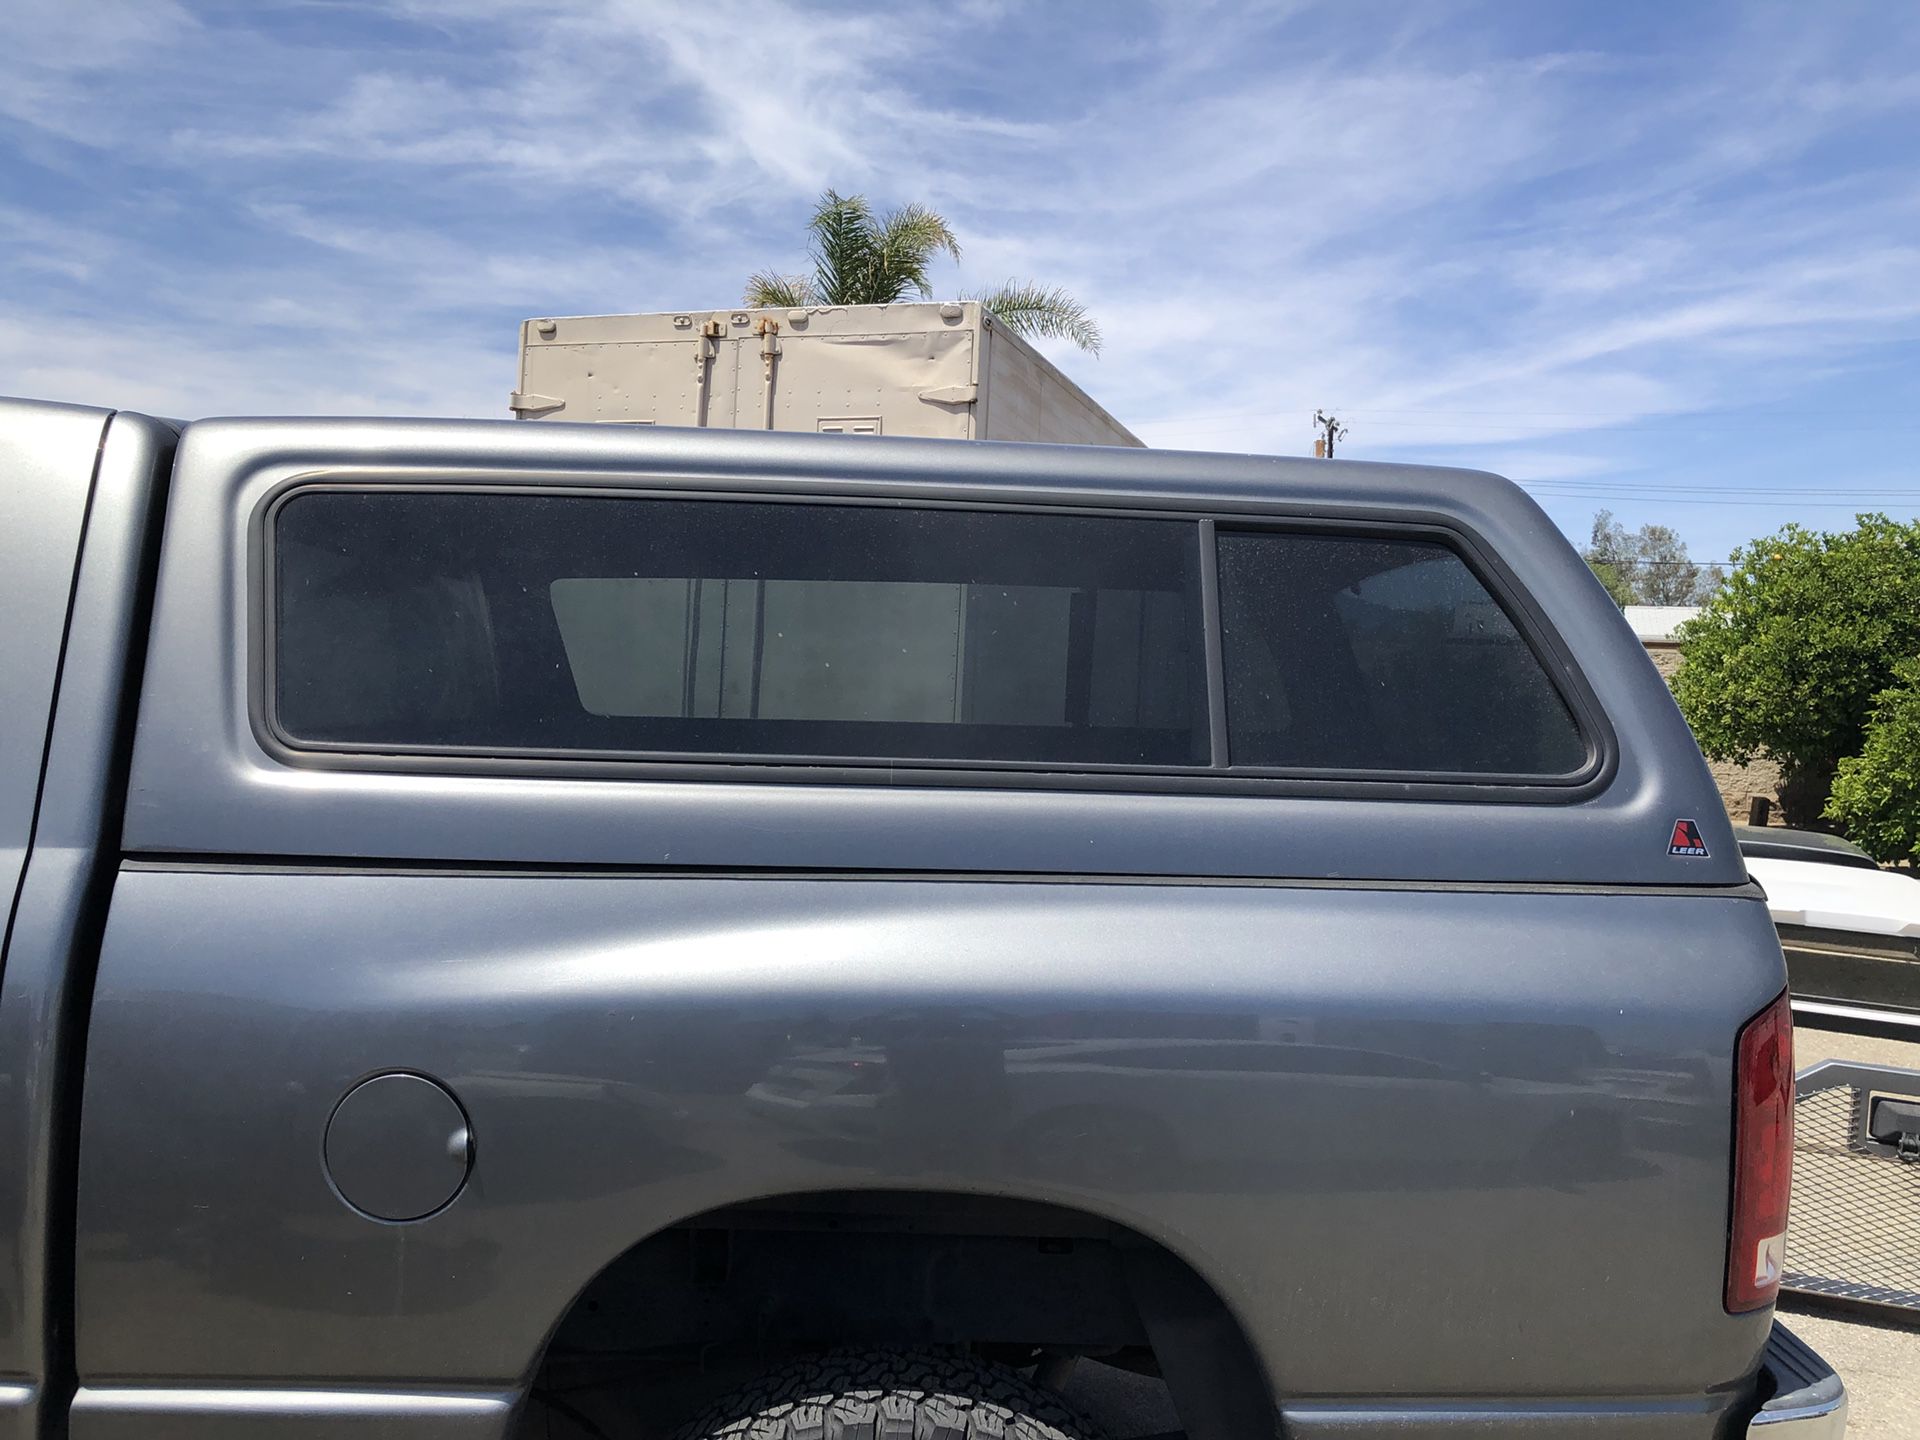 Dodge ram short bed camper truck top top camper box truck shell gray color for Sale in Fontana, CA - OfferUp